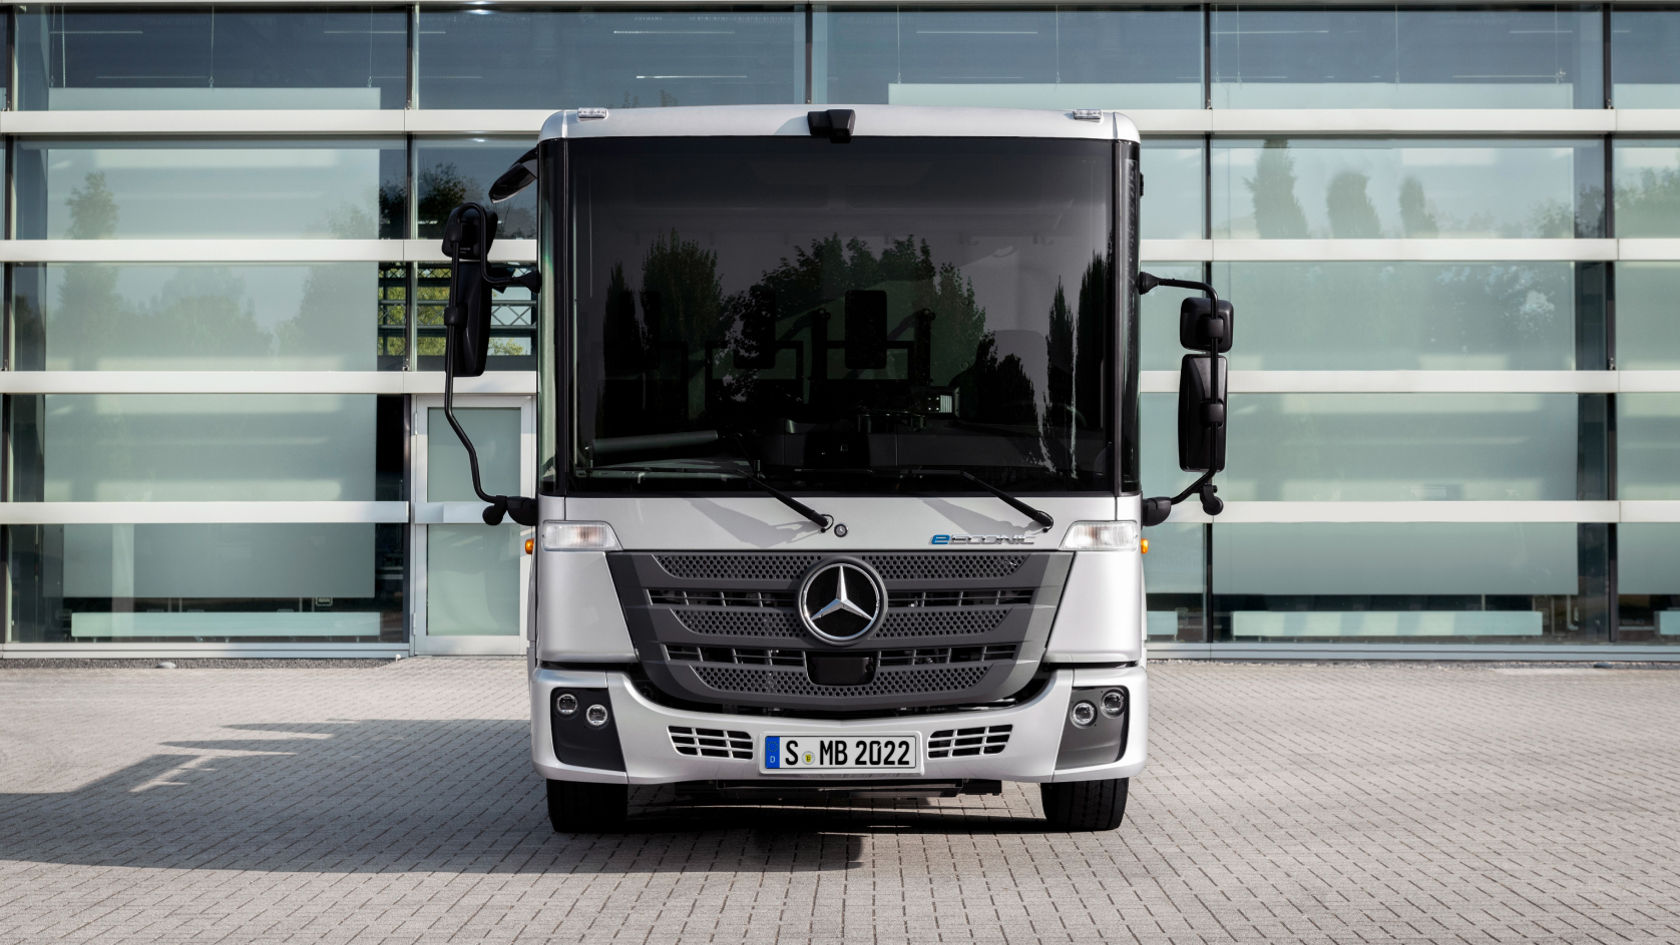 The eActros 600 in detail.